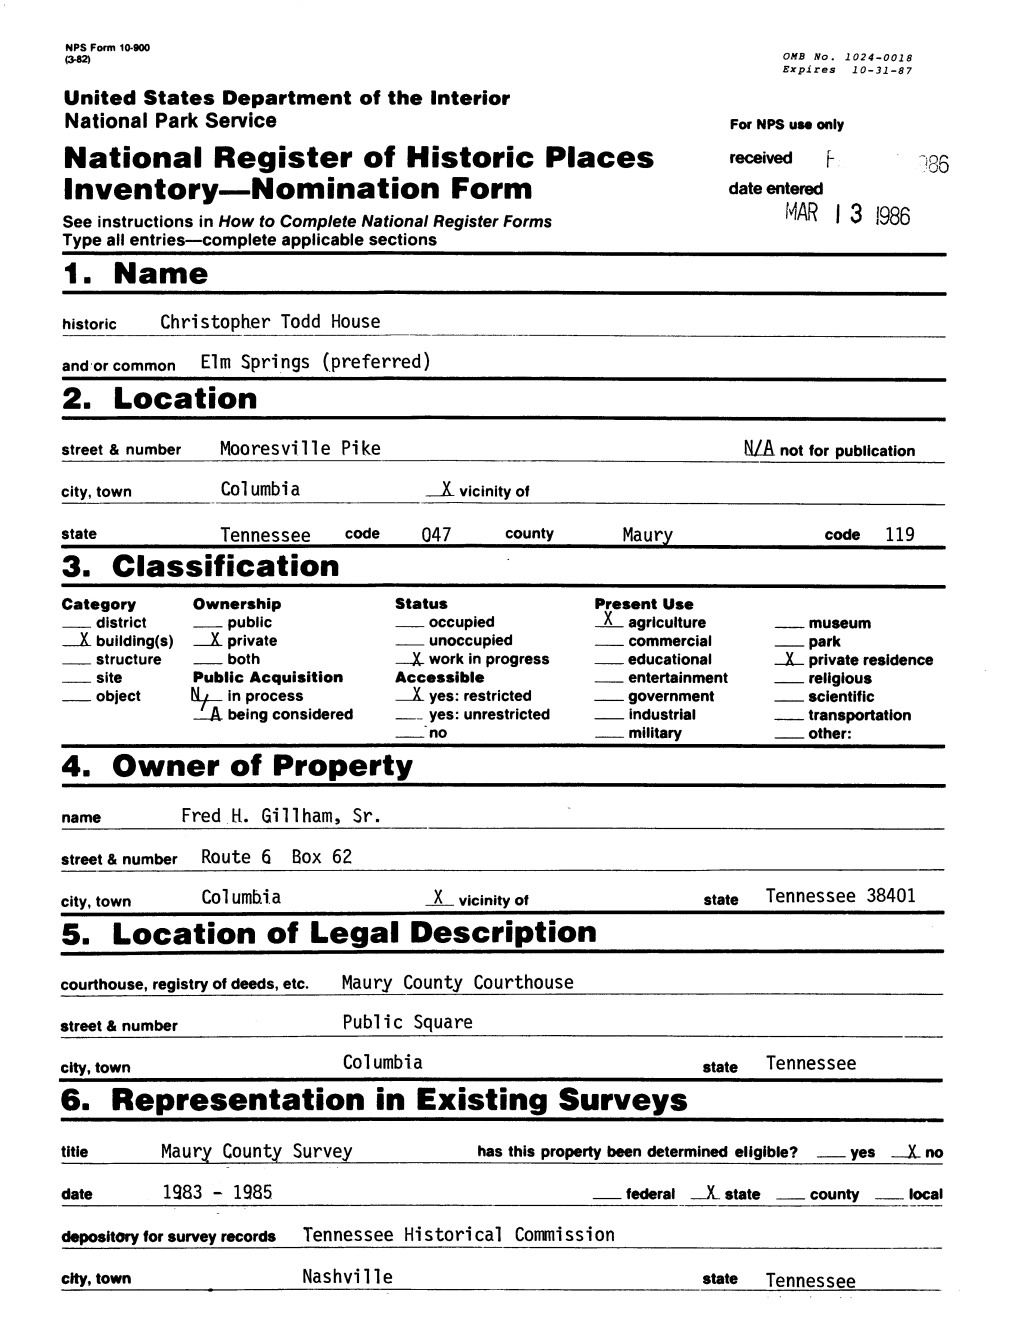 6. Representation in Existing Surveys Title Maury County Survey Has This Property Been Determined Eligible? Yes X